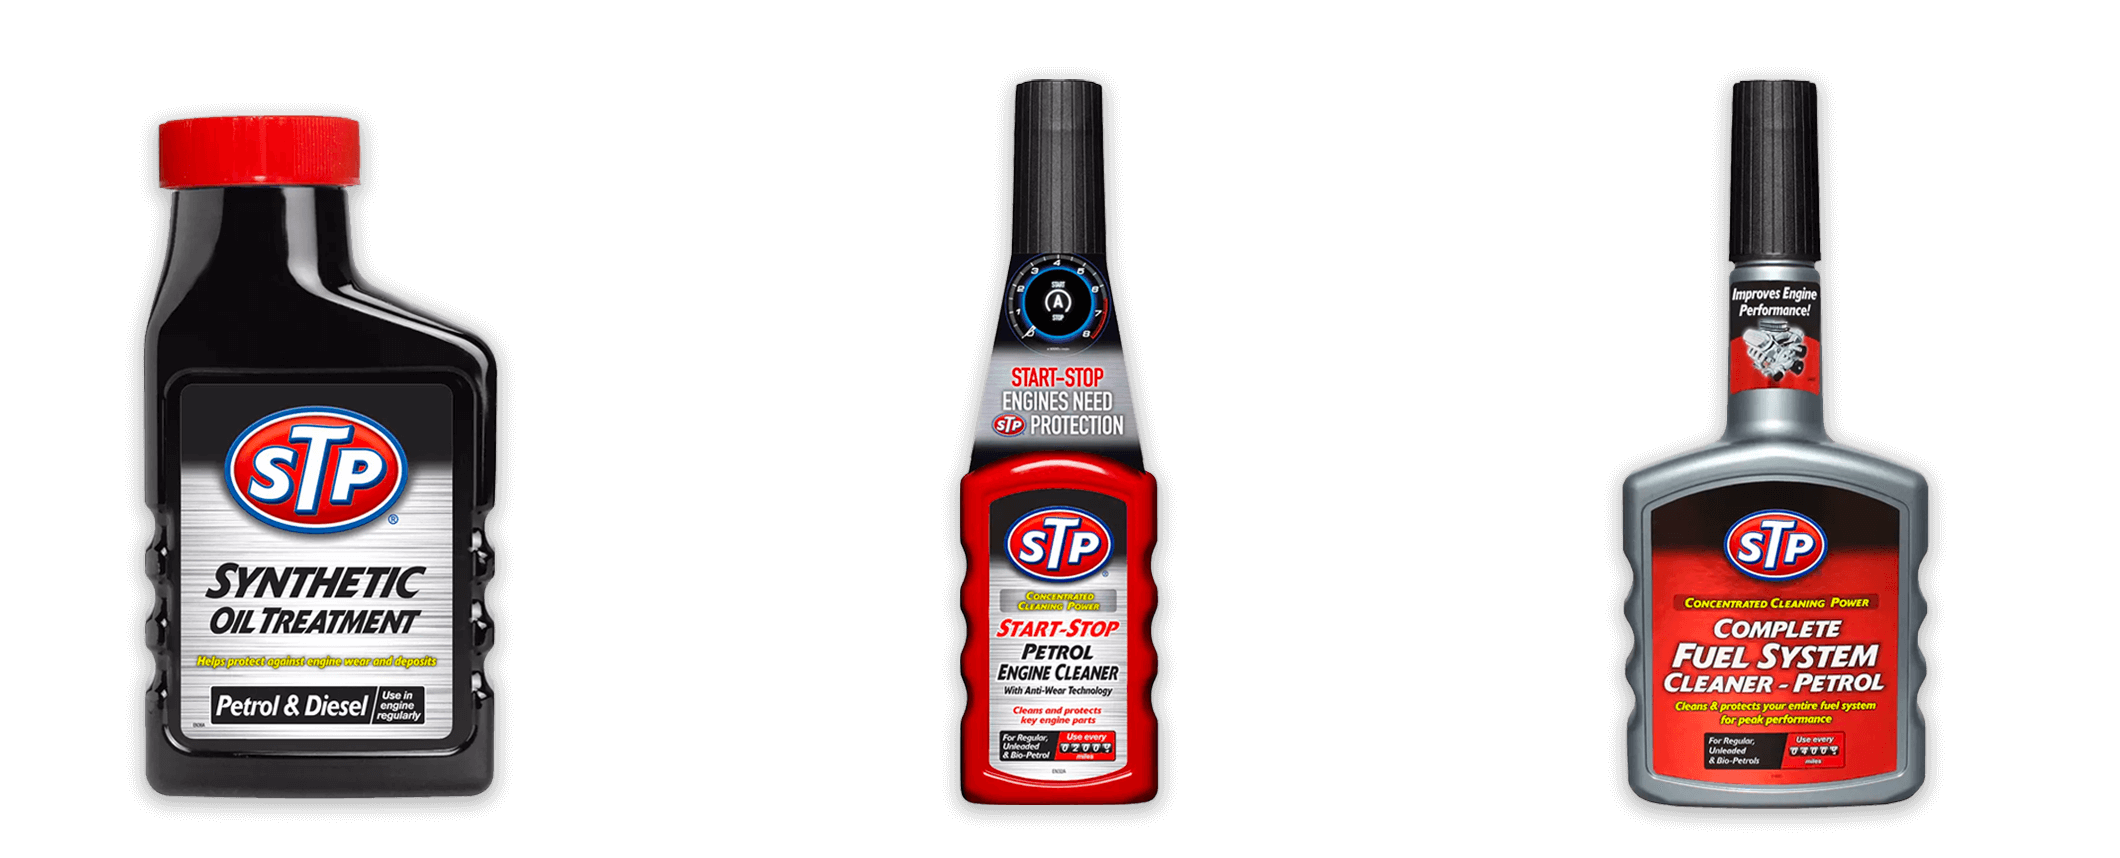 STP Oil Treatment for Petrol Engines 